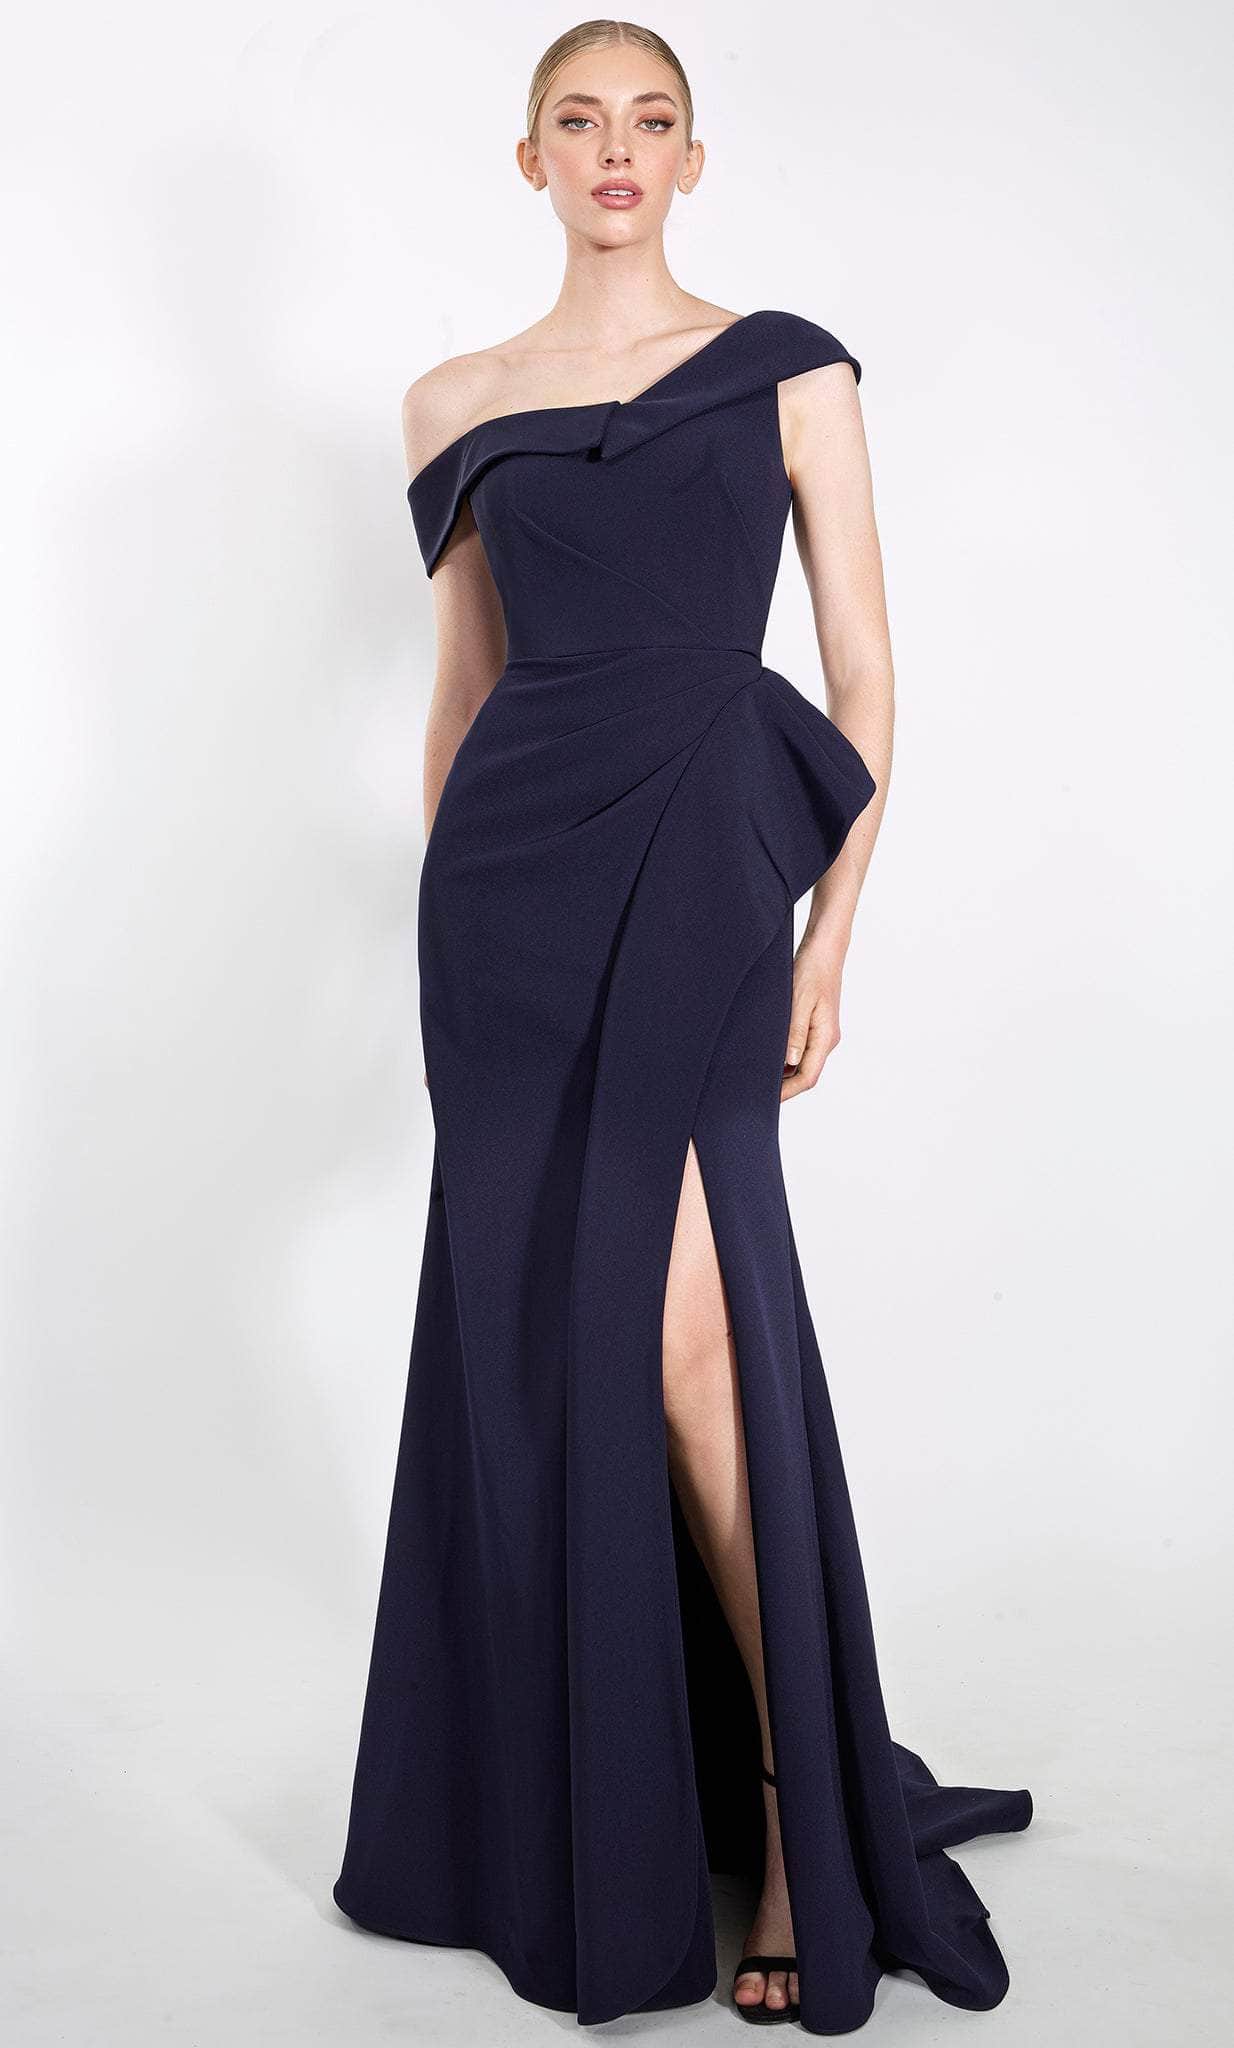 Image of Janique 23014 - Cap Sleeve Mermaid Prom Gown